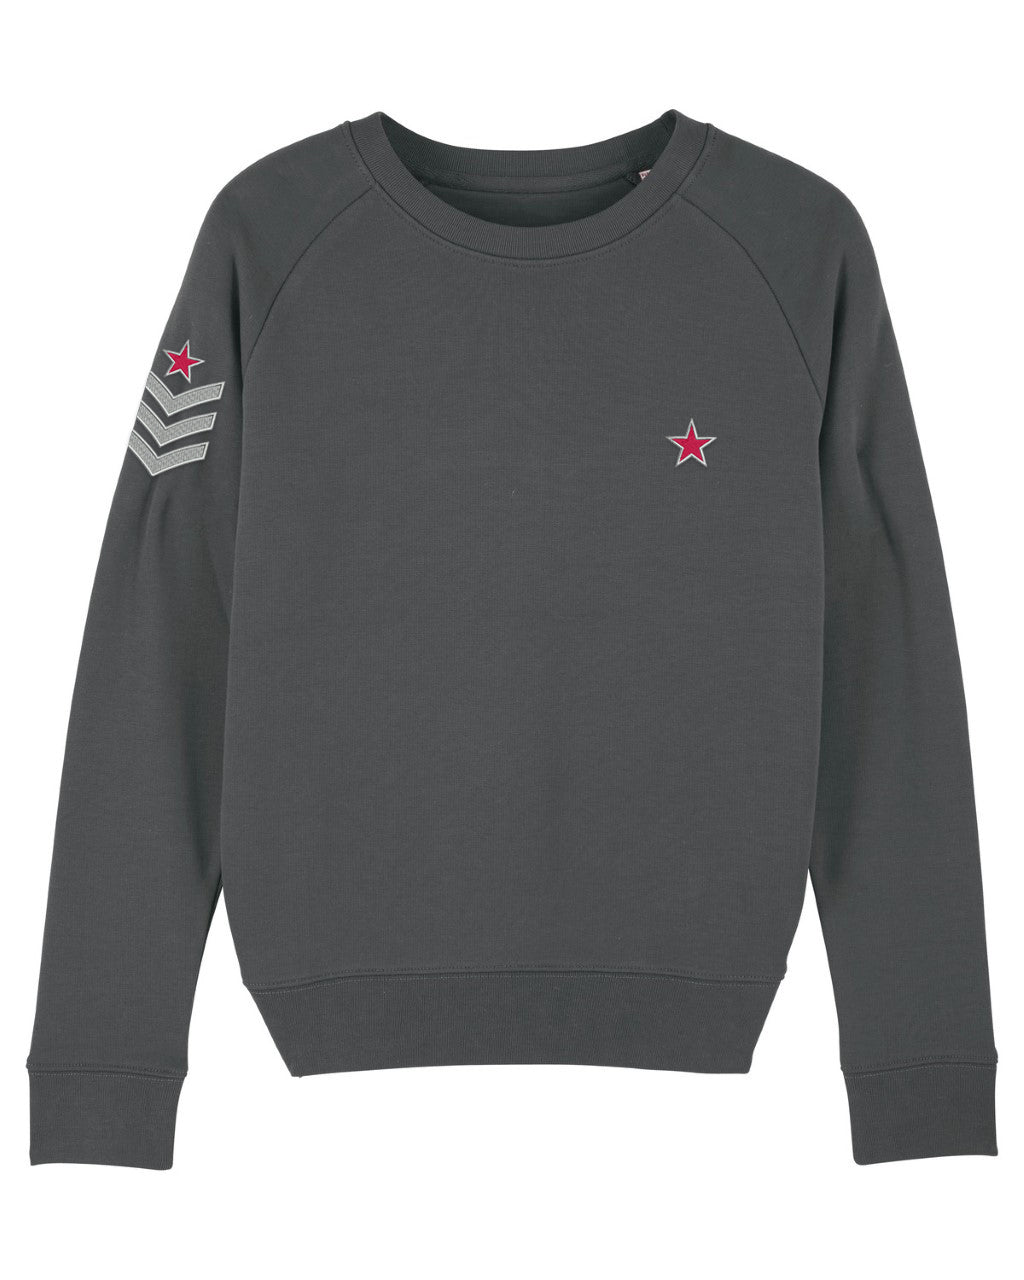 Anthracite Grey Military Sweatshirt - MADE TO ORDER